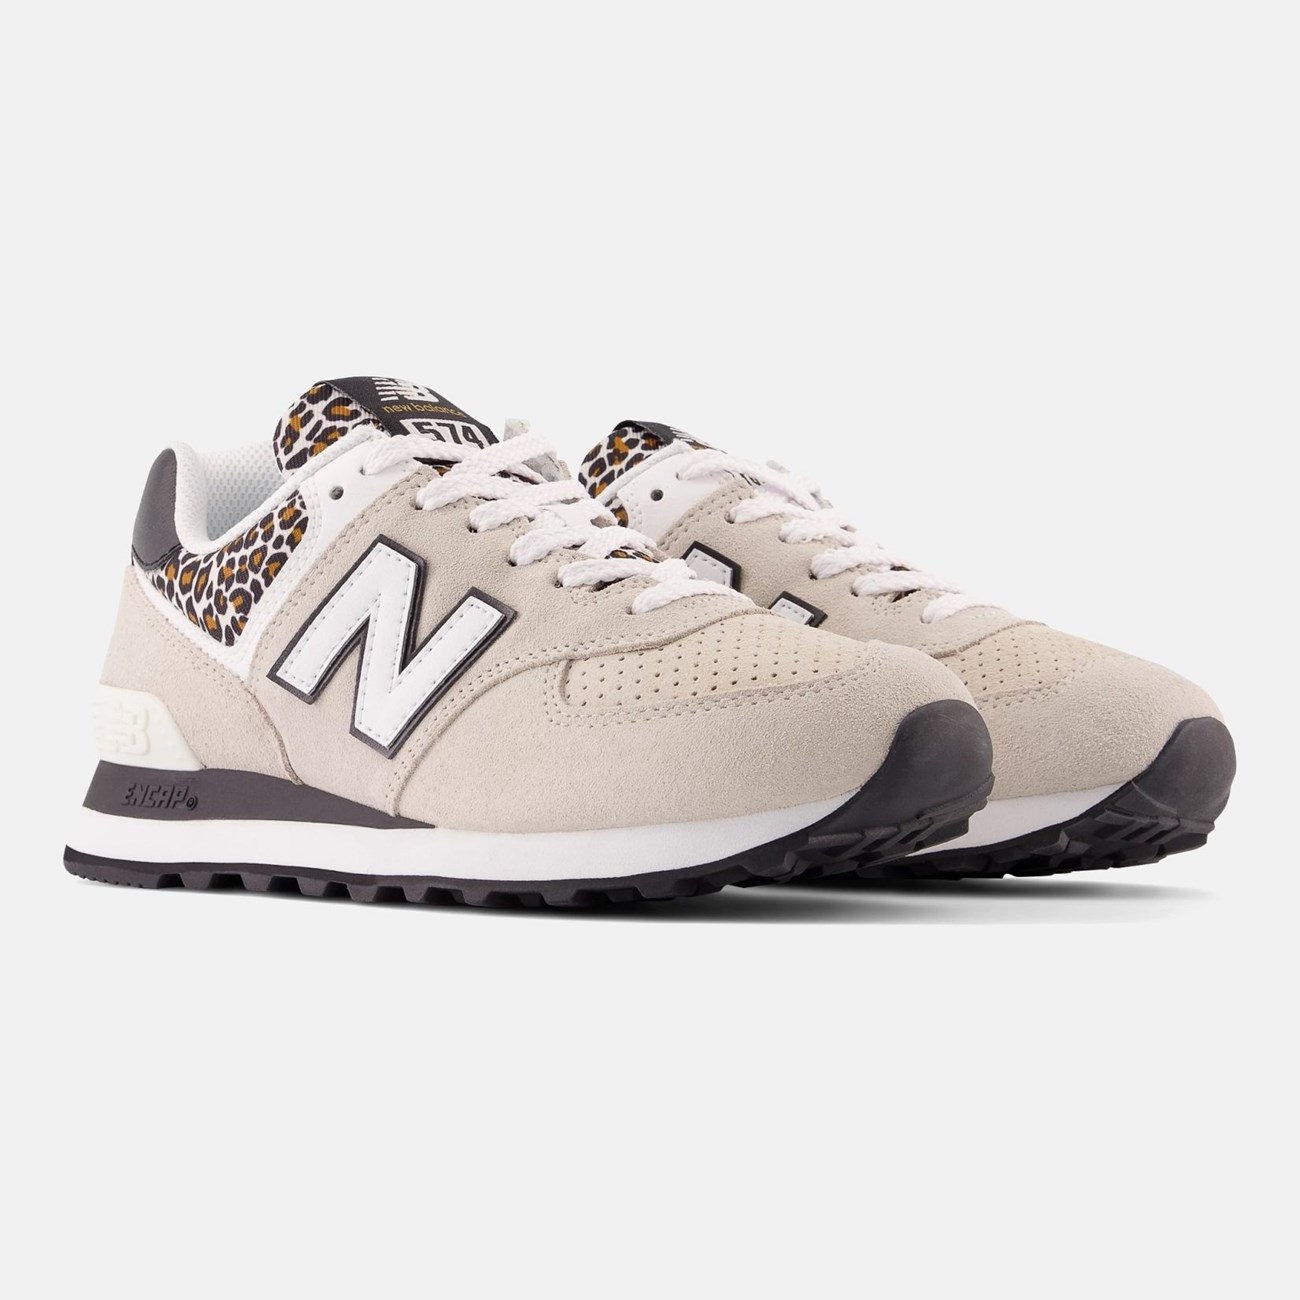 NEW BALANCE Γυναικεία Sneakers 574 WL574-AY2 - The Athlete's Foot